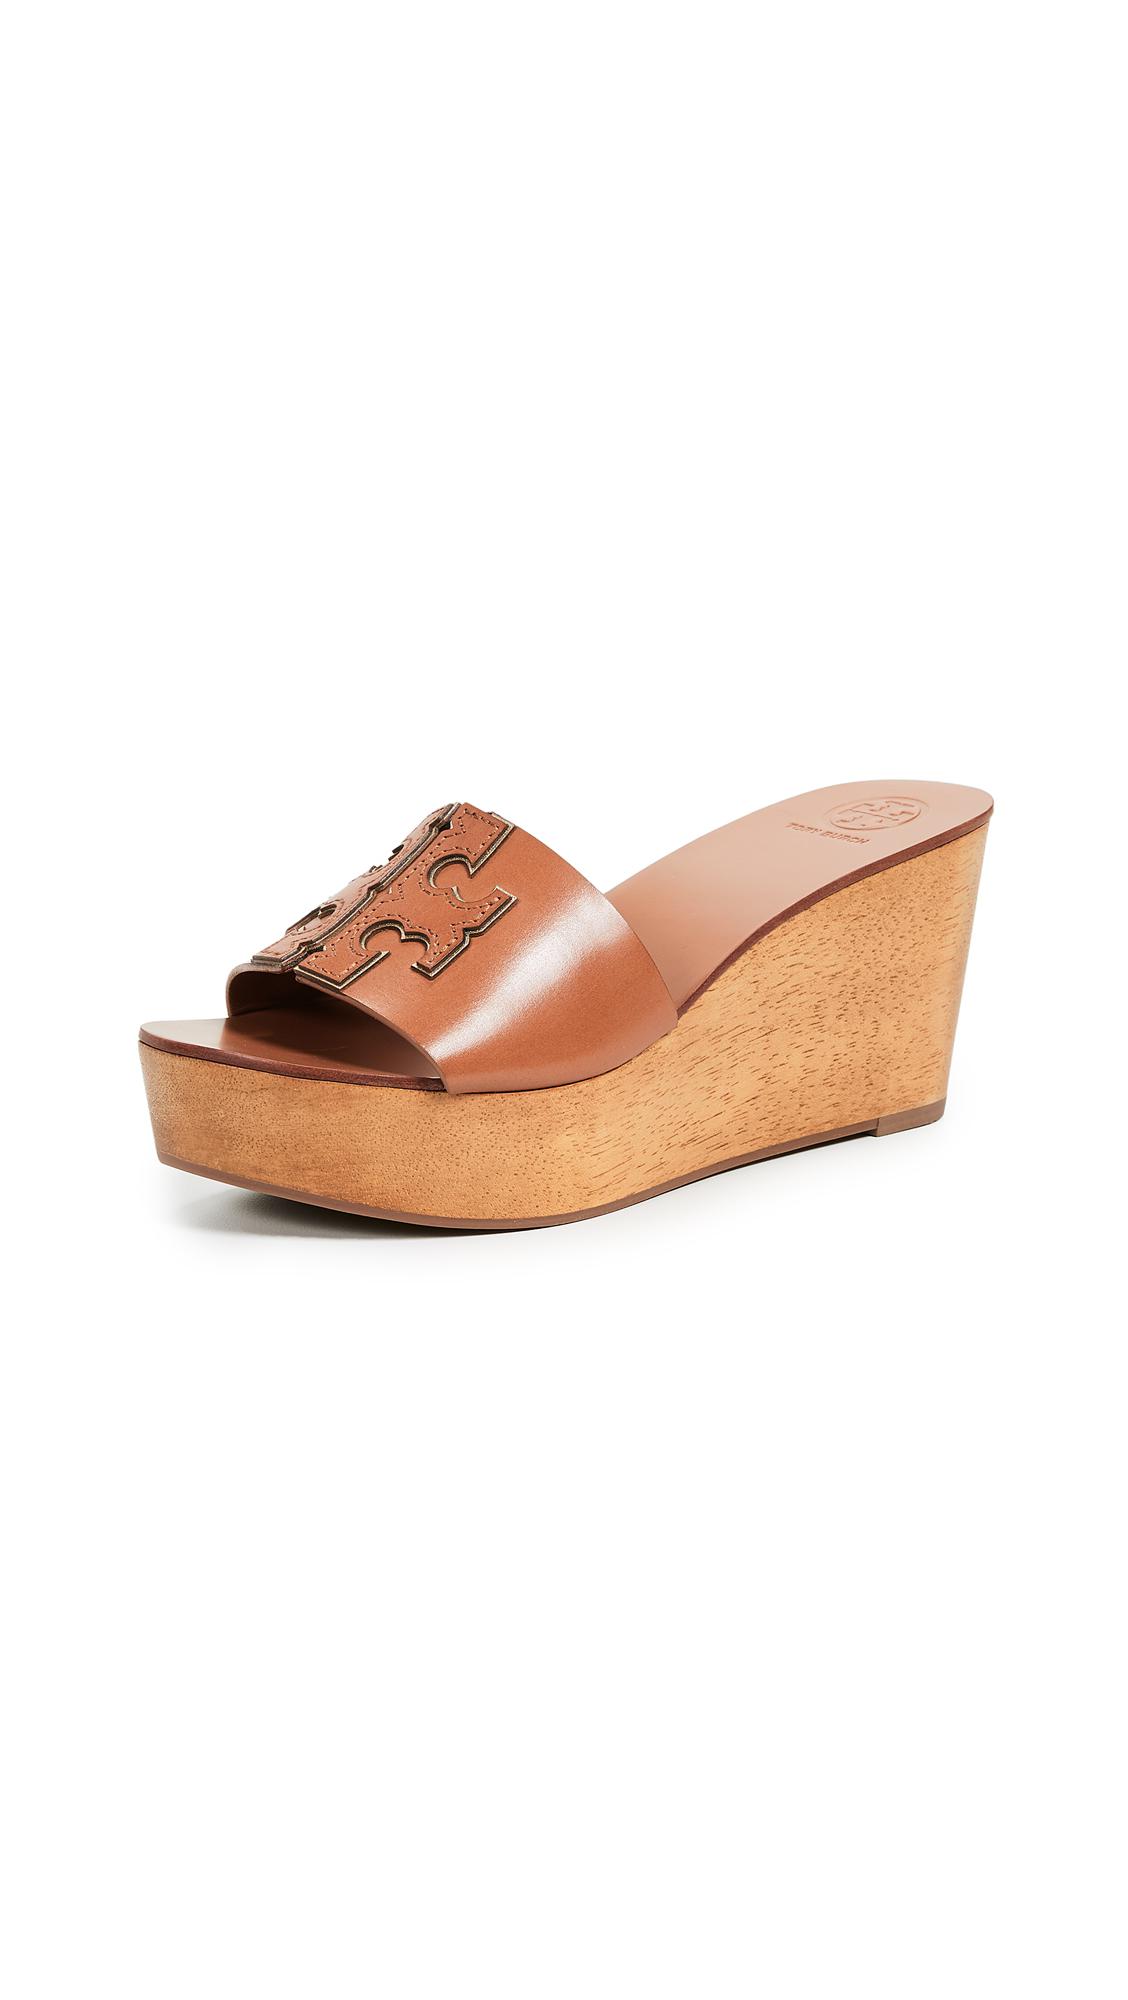 Tory Burch Leather Ines 80mm Wedge Slides in Brown - Lyst